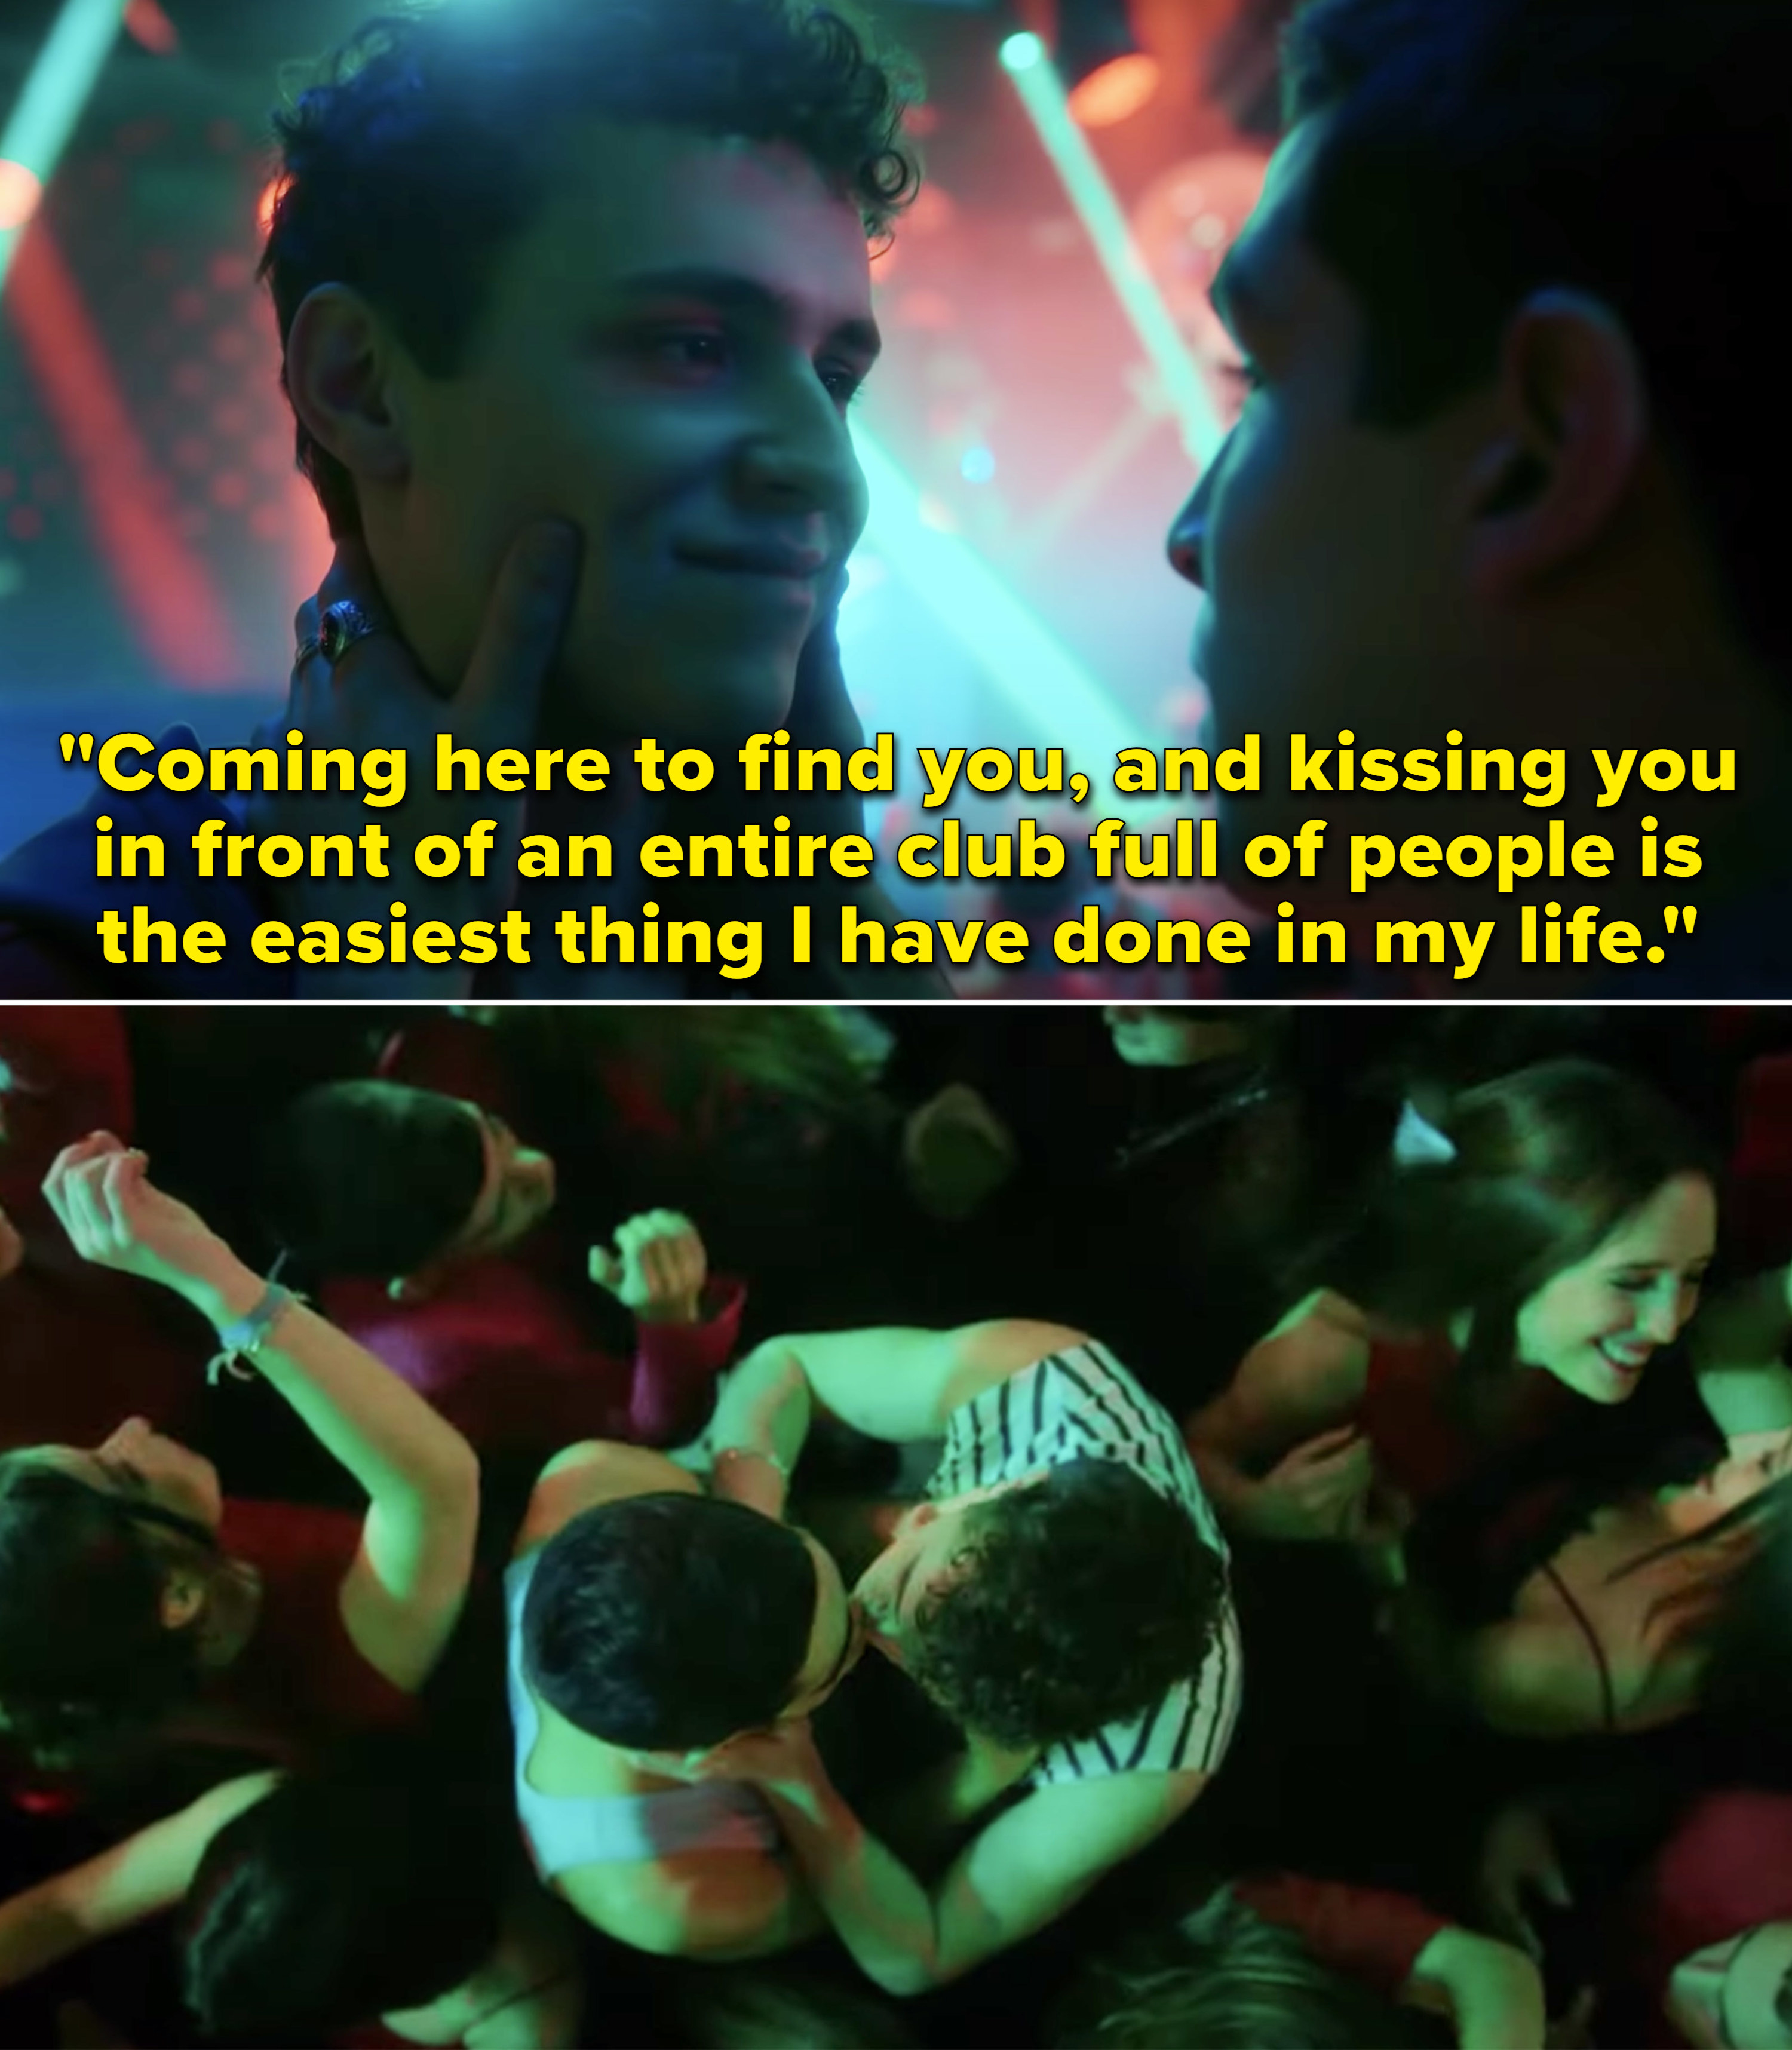 Omar saying, &quot;Coming here to find you, and kissing you in front of an entire club full of people is the easiest thing I have done in my life&quot;